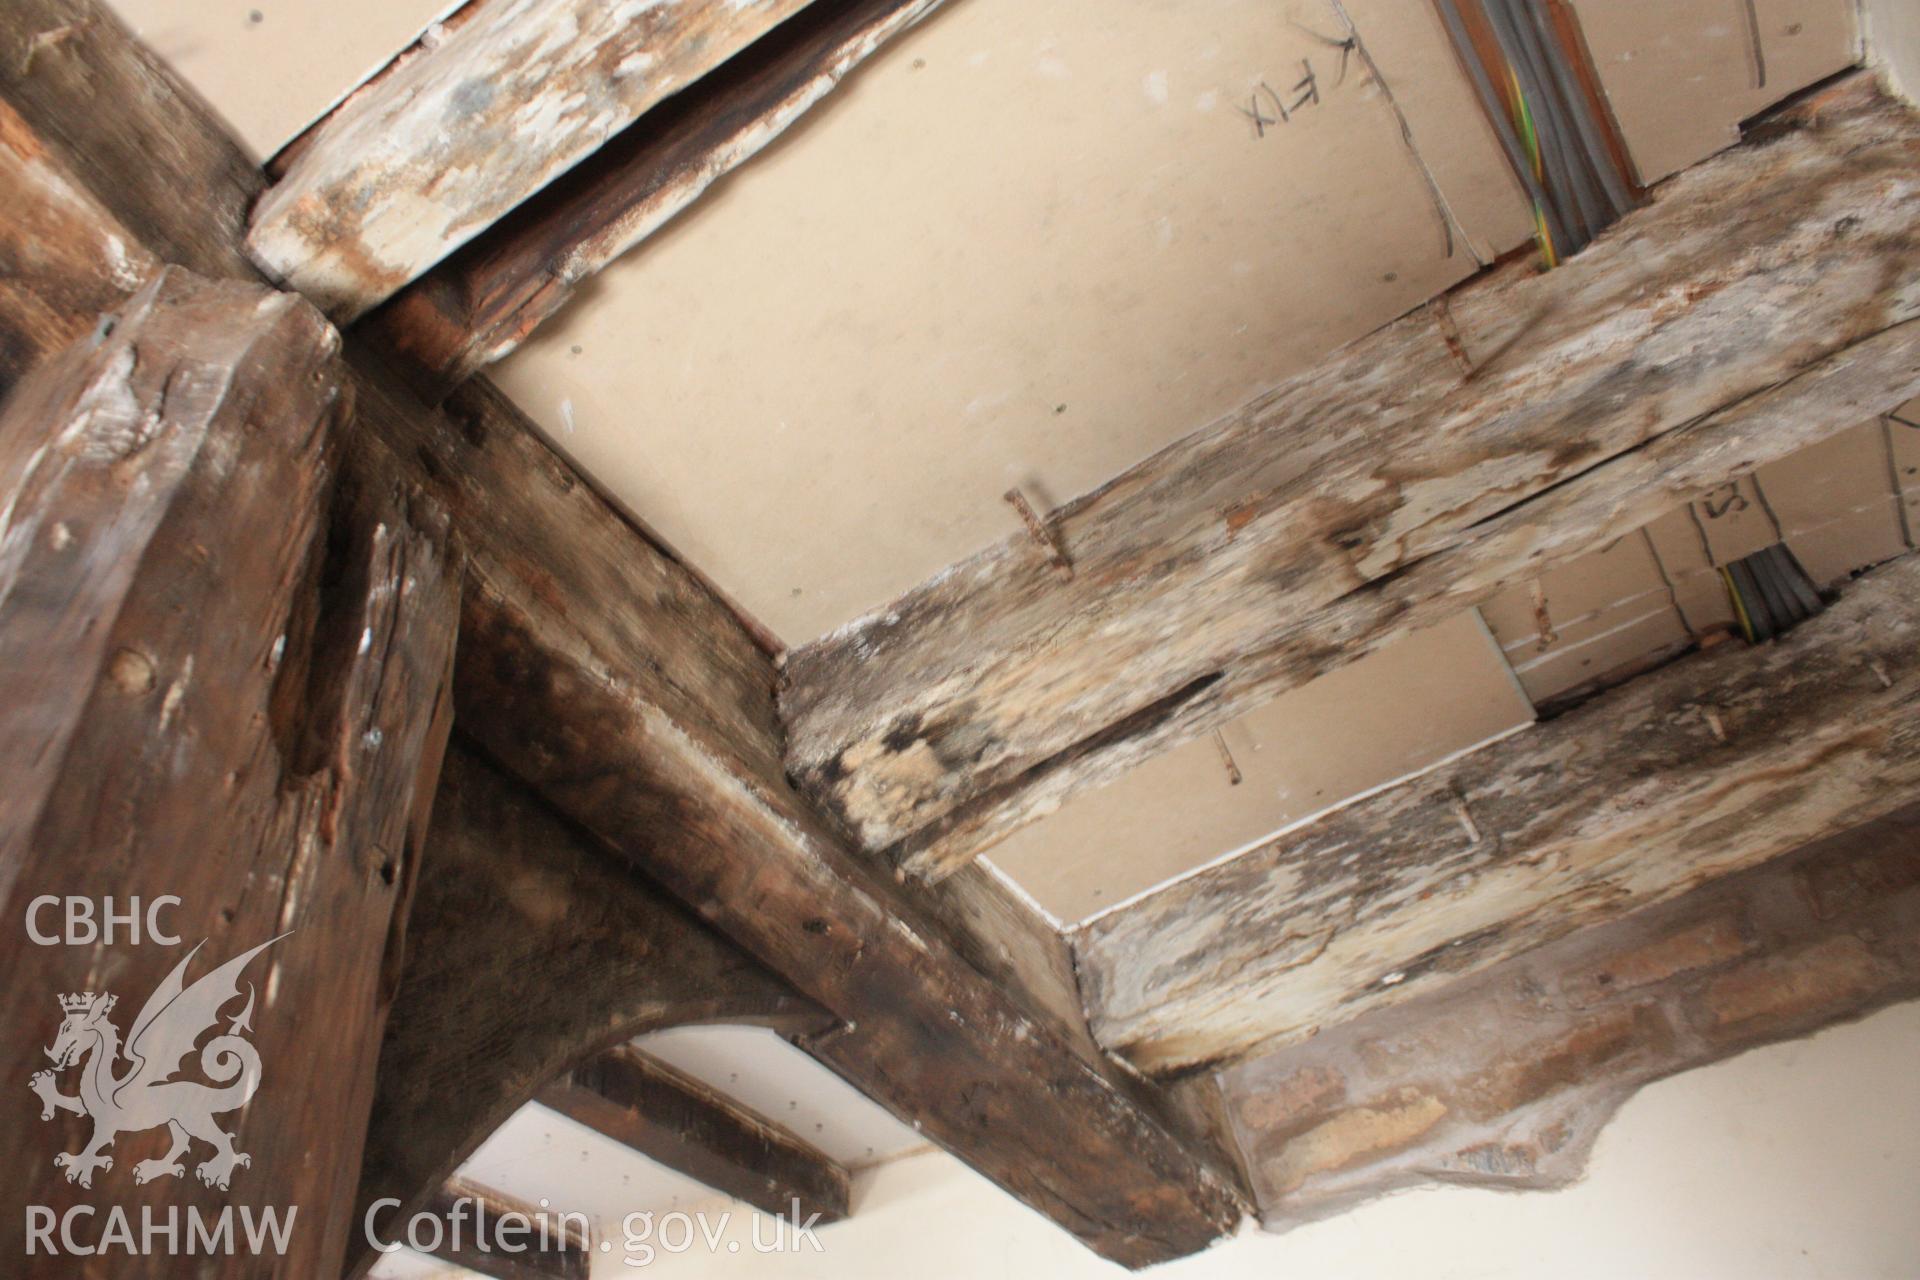 Colour photograph of internal timber frame and ceiling beams at Porth-y-Dwr, 67 Clwyd Street, Ruthin. Photographed during survey conducted by Geoff Ward on 10th June 2013.